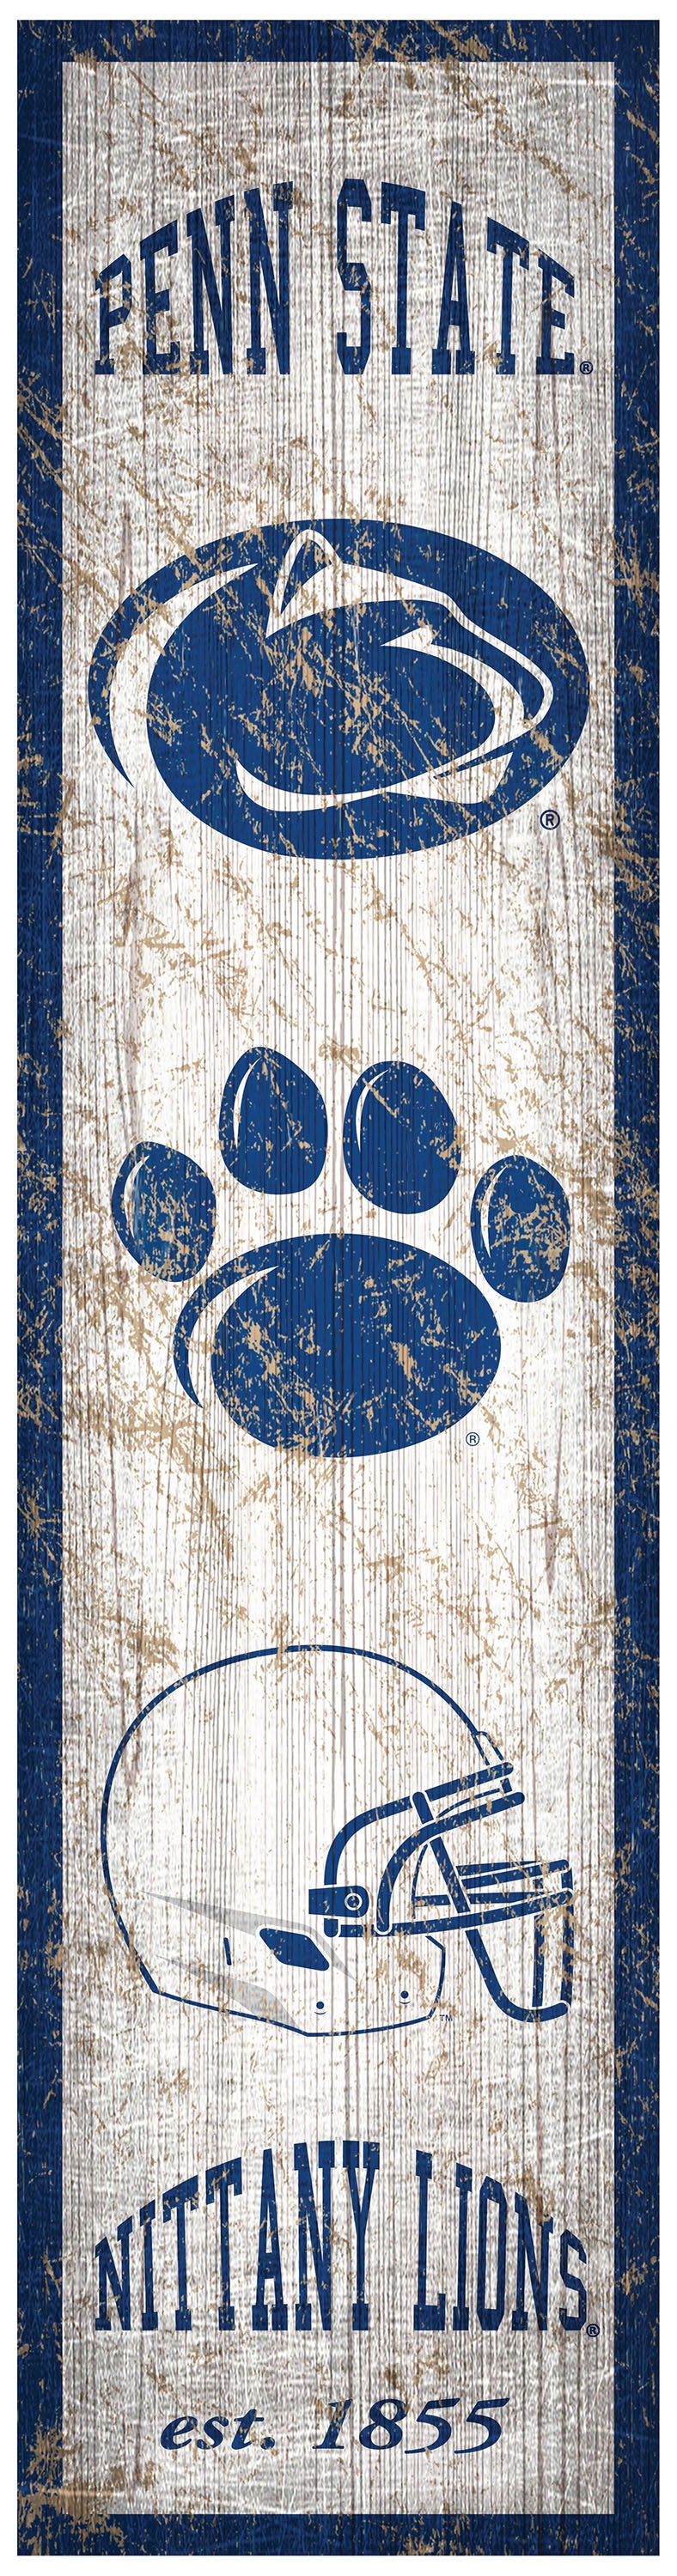 Penn State Nittany Lions Heritage Banner Wood Sign - 6